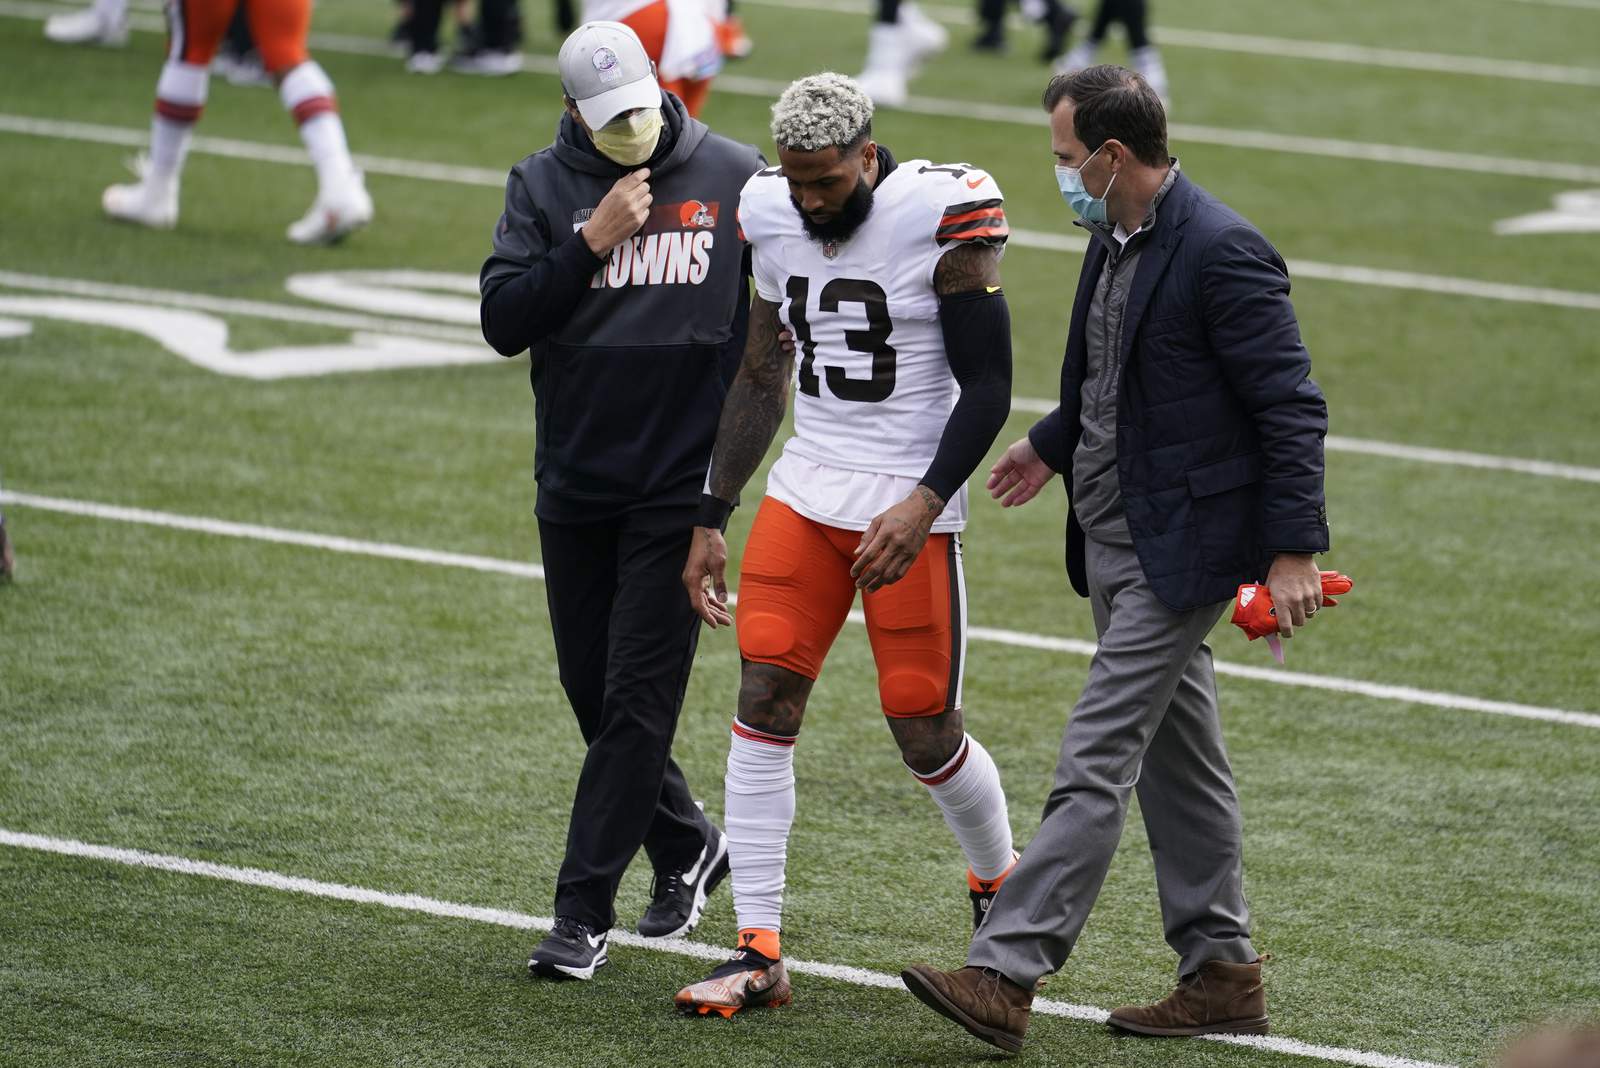 Browns' Beckham, Washington's Collins leave with injuries